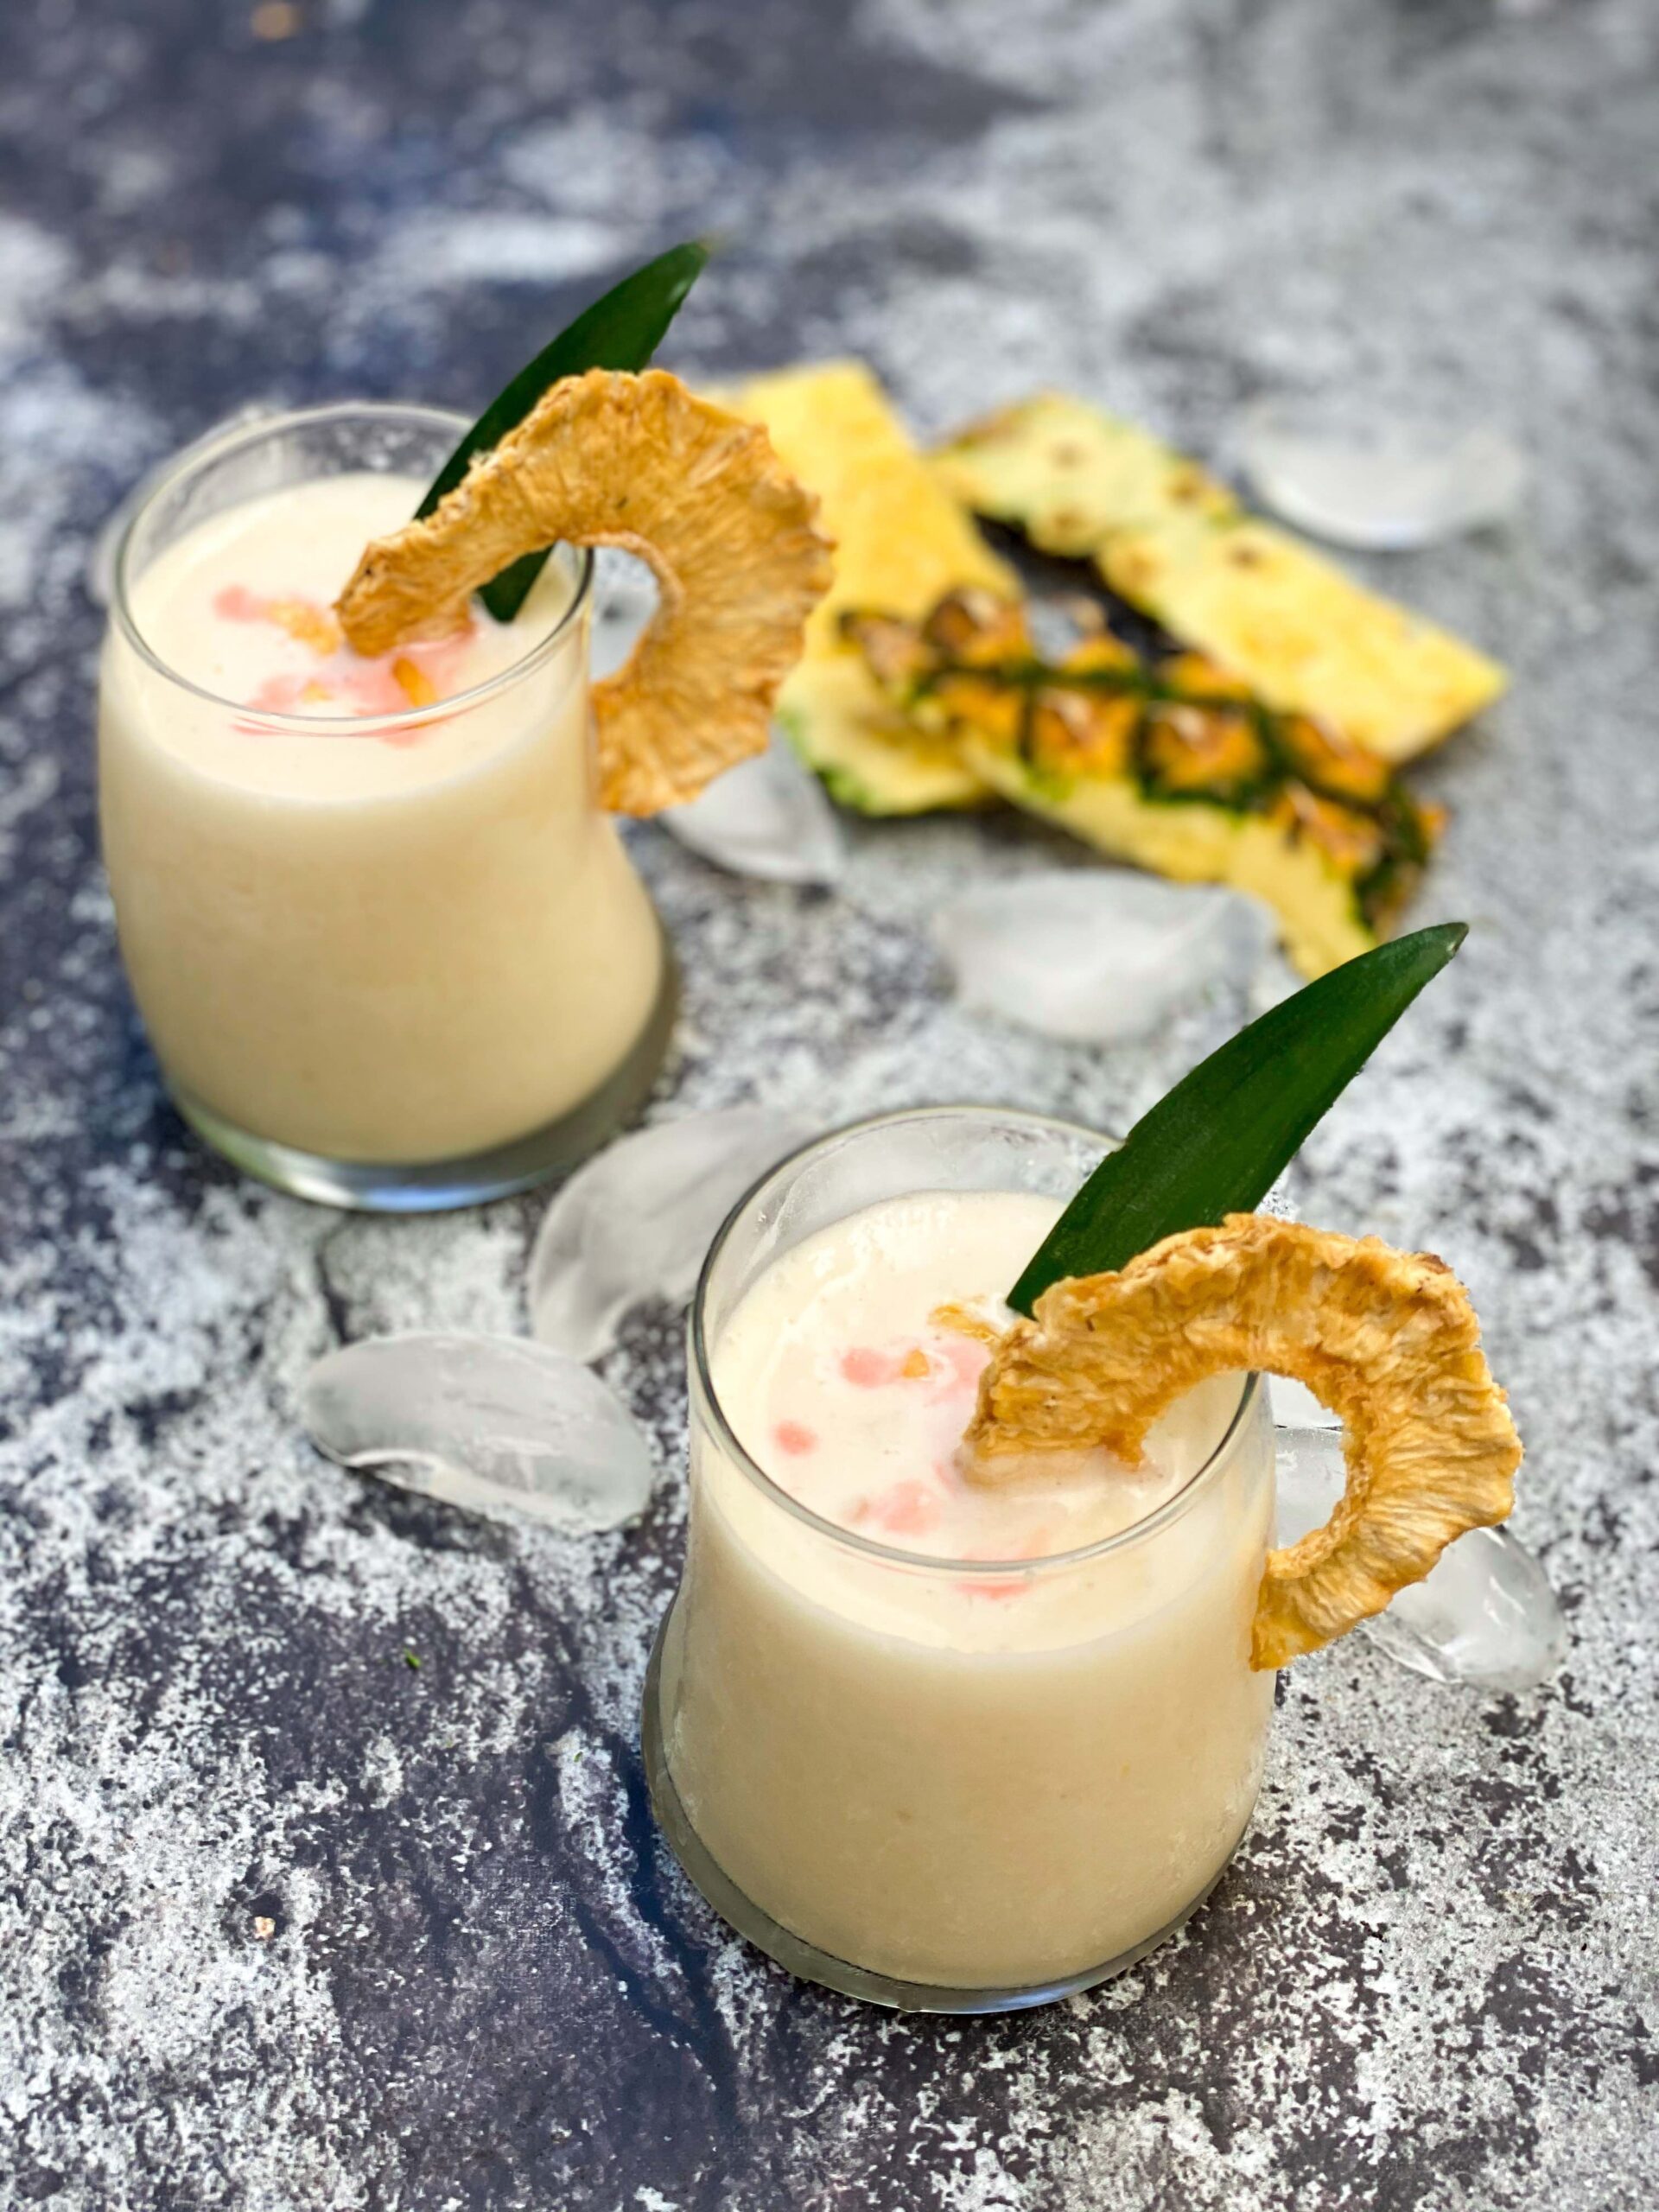 The Ultimate Pina Colada for tastybites.net